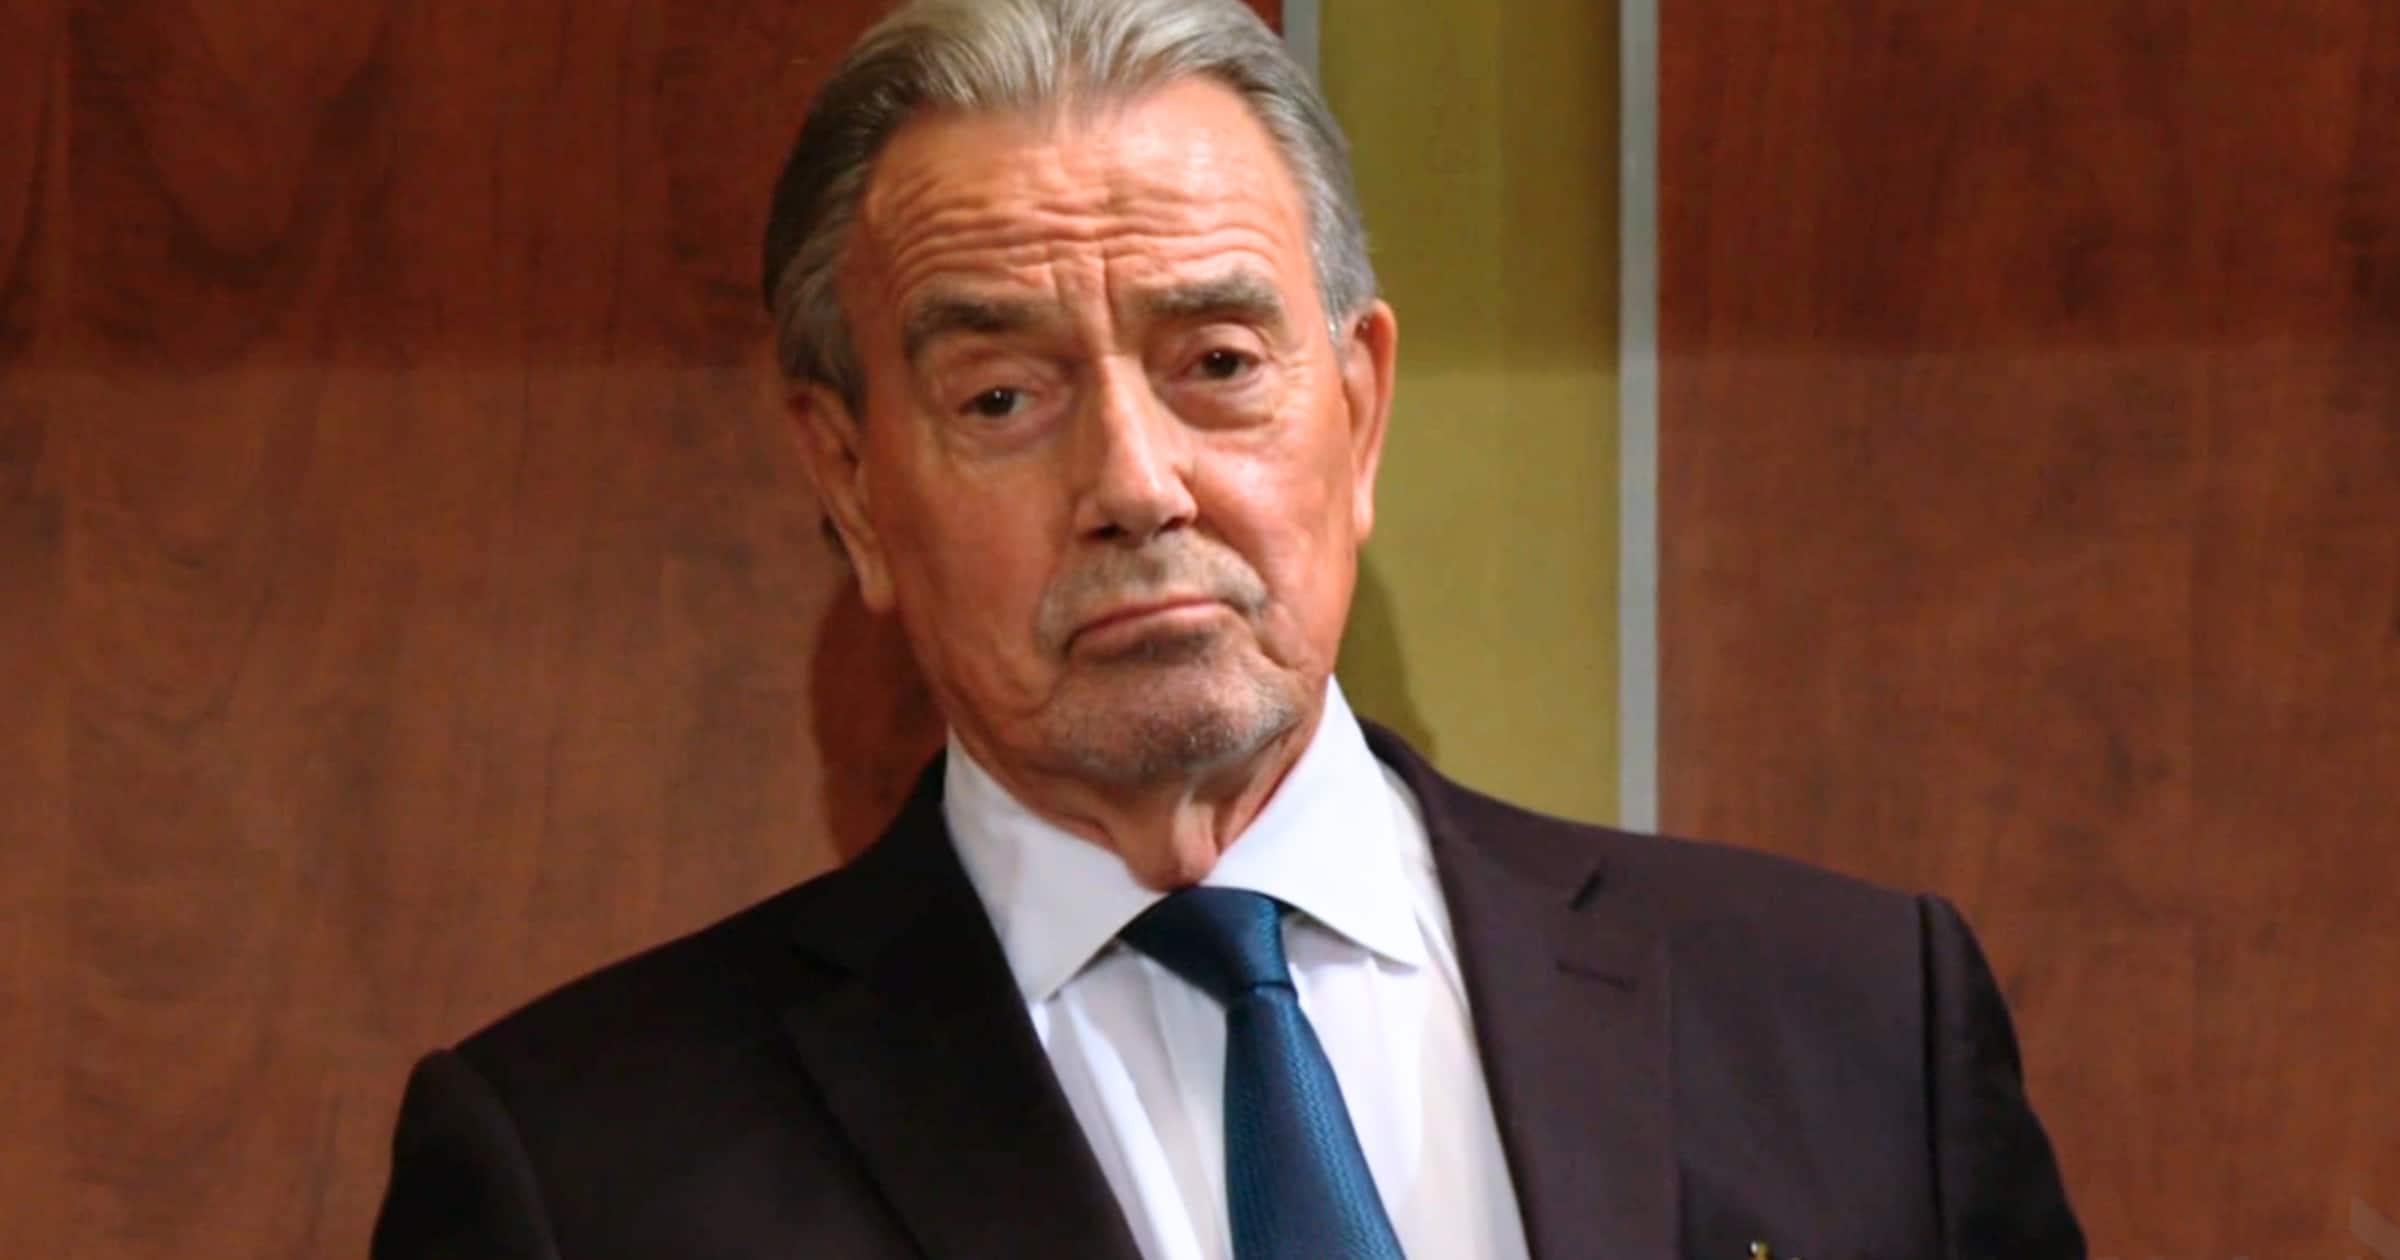 The Young and the Restless - Nov 6 - Victor